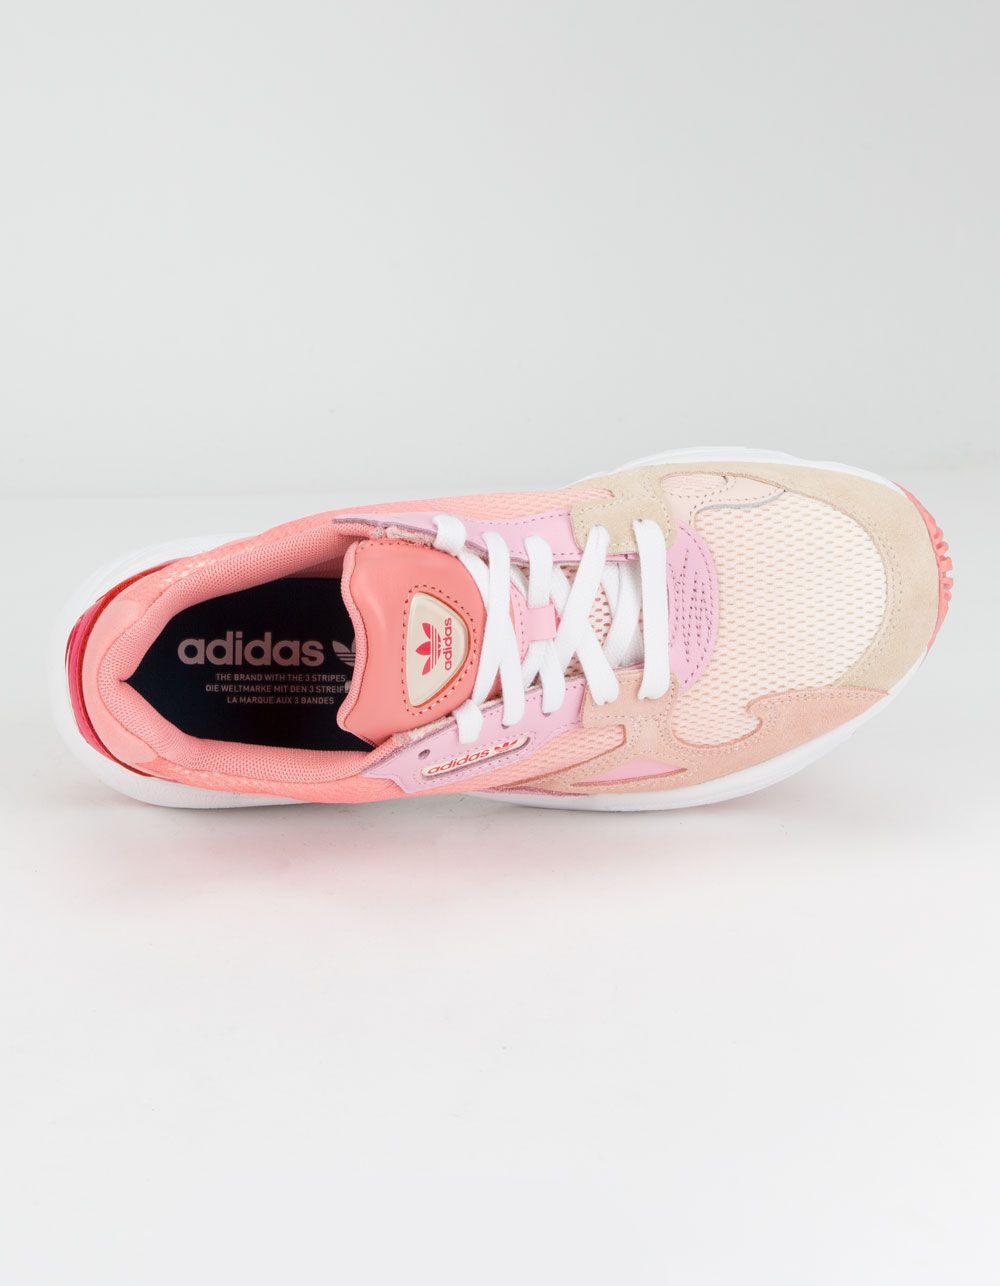 ADIDAS Falcon Ecru Tint & Icey Pink Womens Shoes image number 2